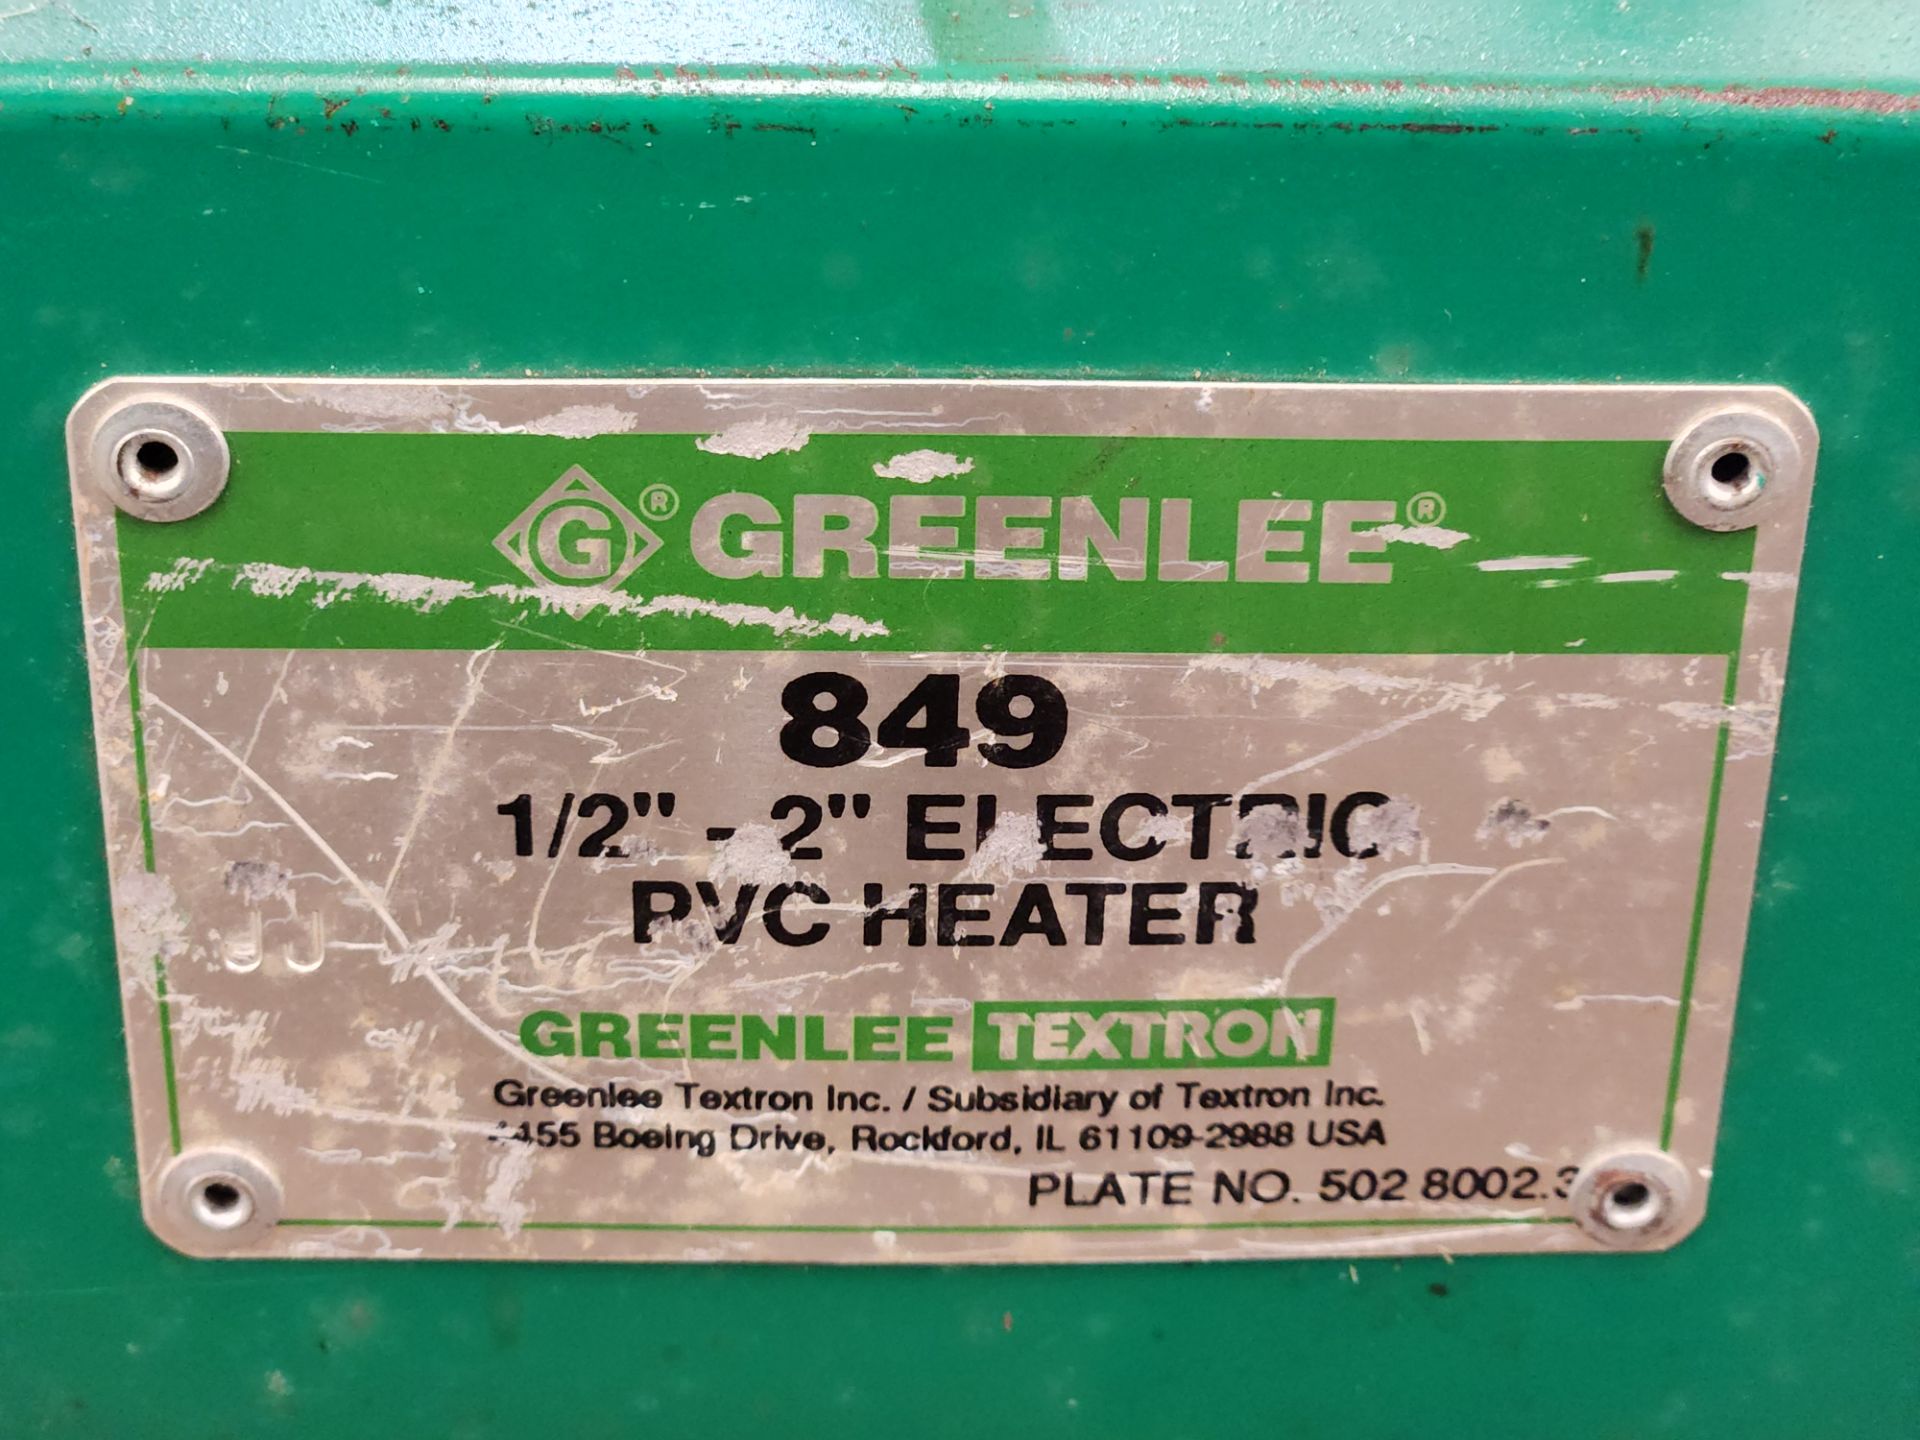 Greenlee 849 1/2" - 2" Electric PVC Heater - Image 2 of 3